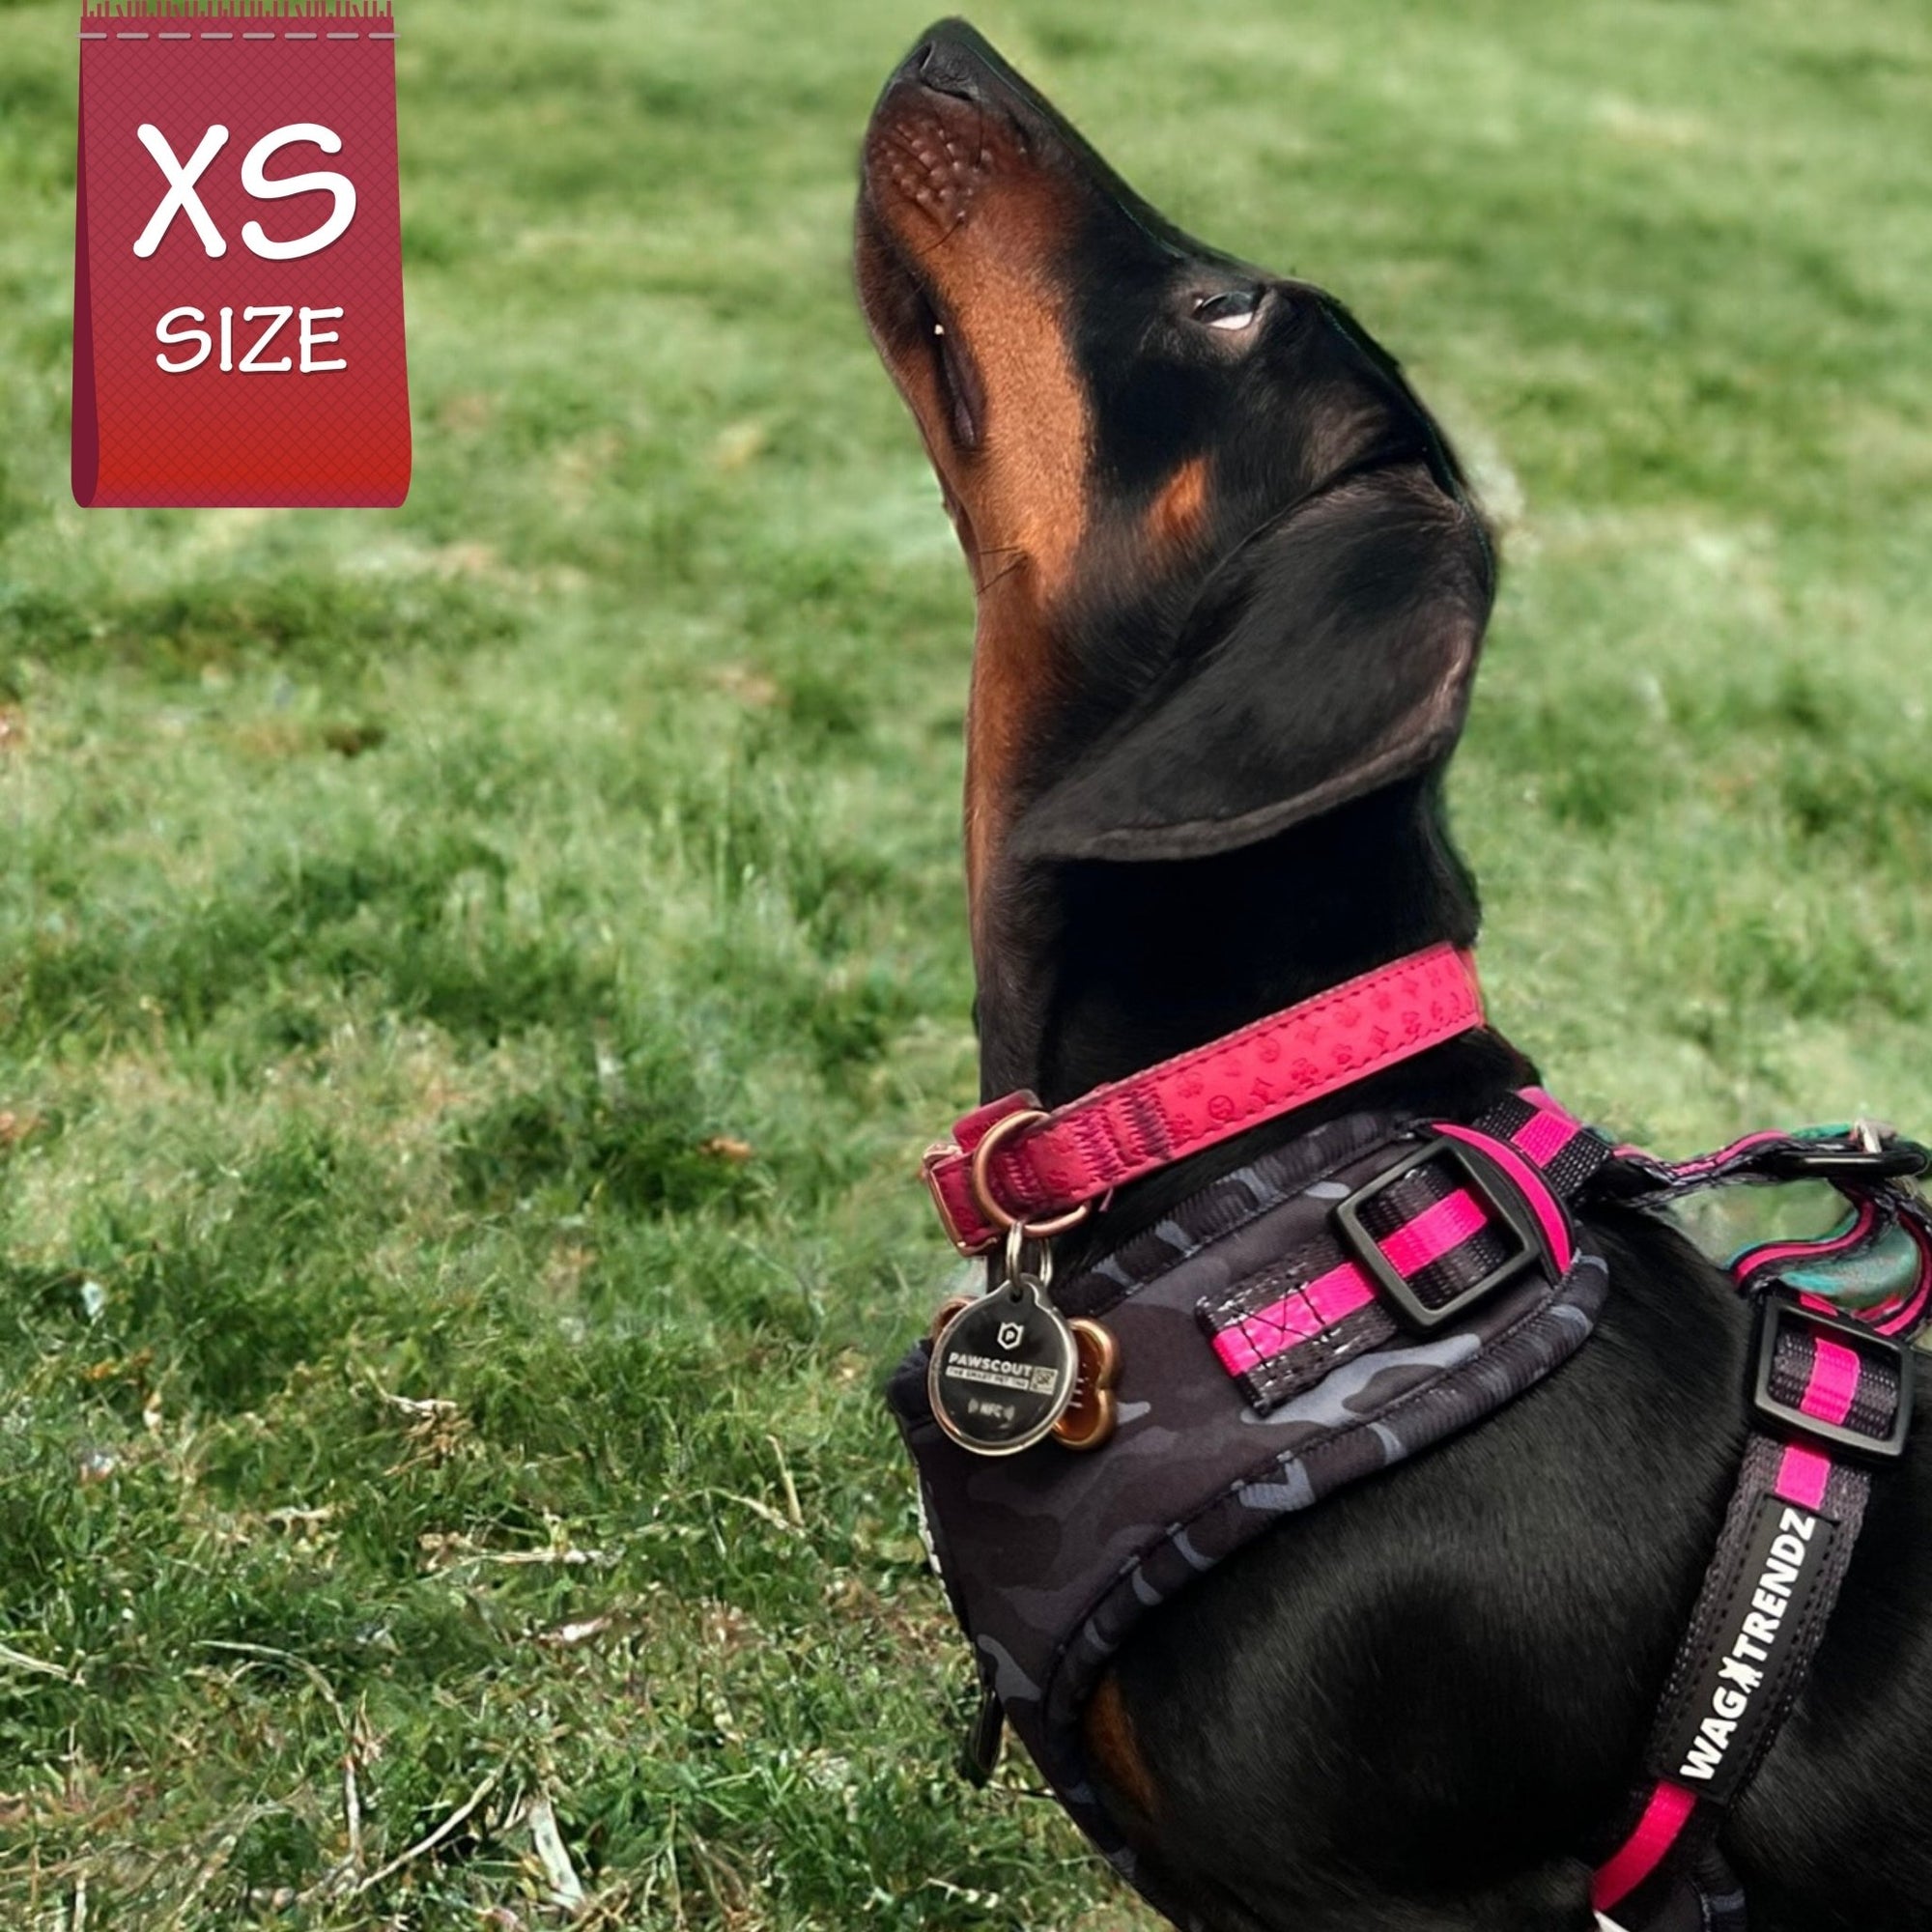 Dog Collar Harness and Leash Set - Dachshund wearing XS Dog Adjustable Harness in black &amp; gray camo with hot pink accents - standing in grass - Wag Trendz